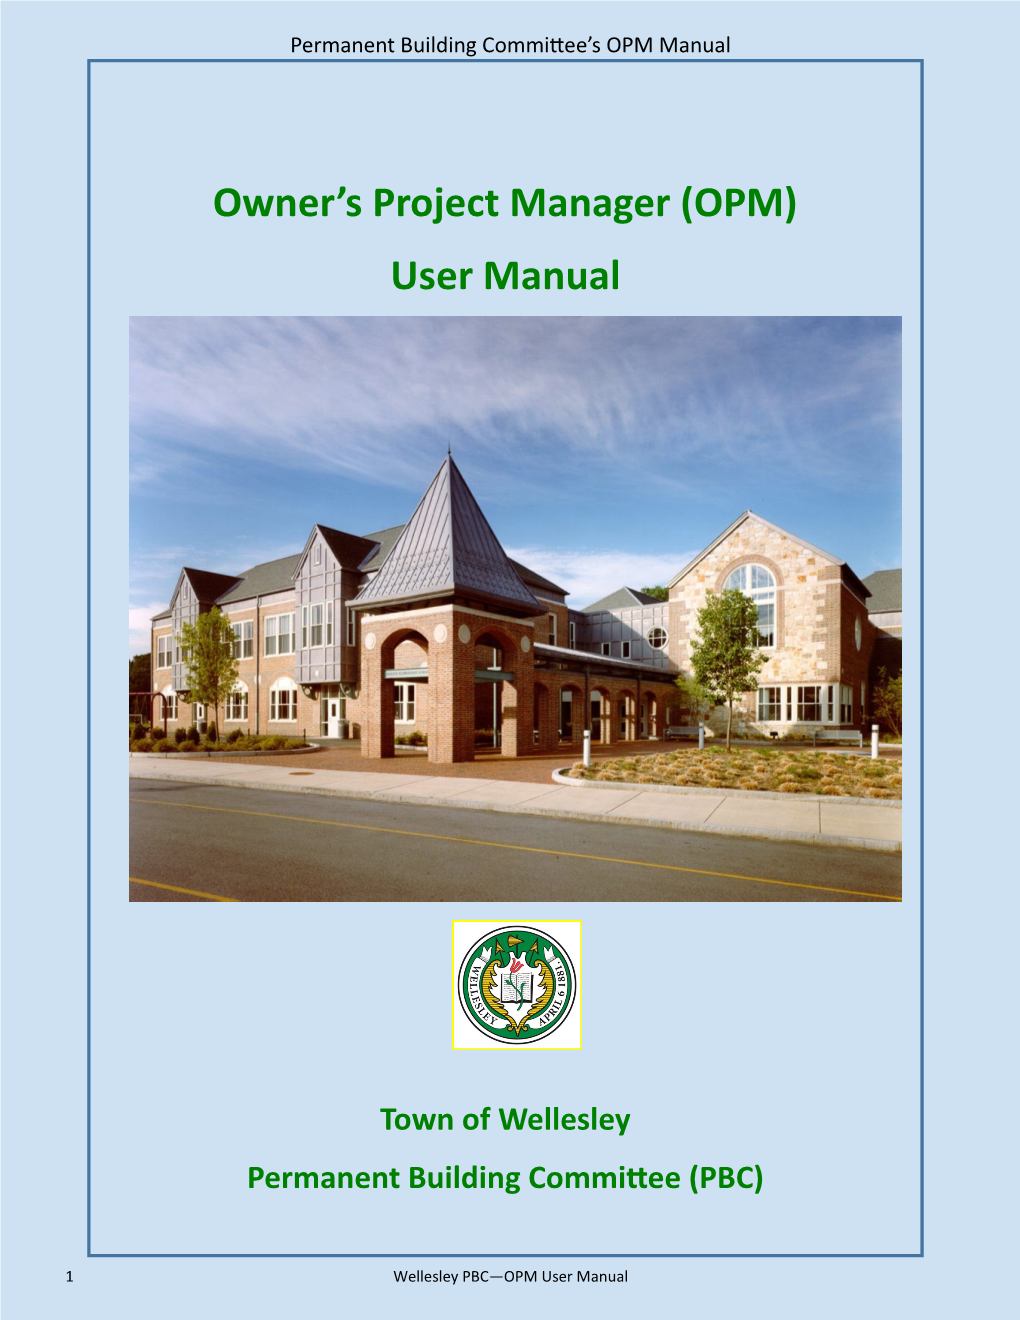 Owner's Project Manager (OPM) User Manual